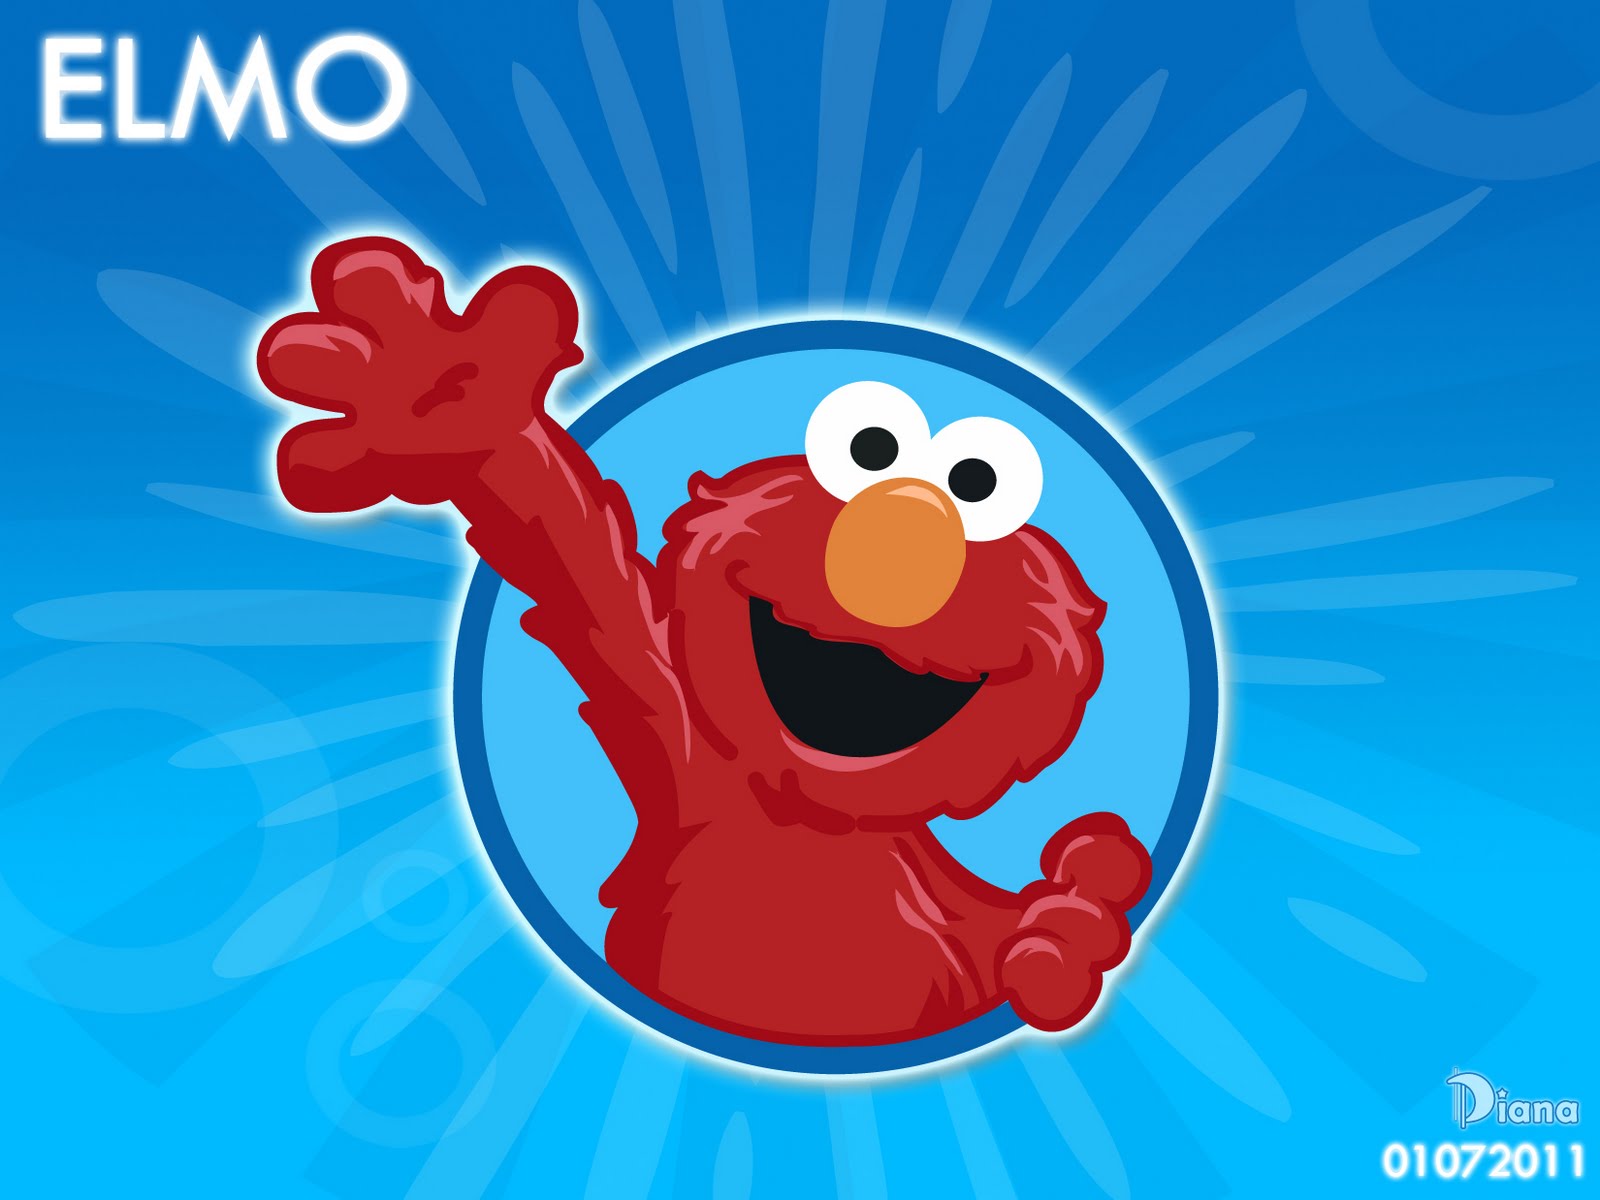 Funny Elmo wallpaper by Sillymoooo  Download on ZEDGE  4259